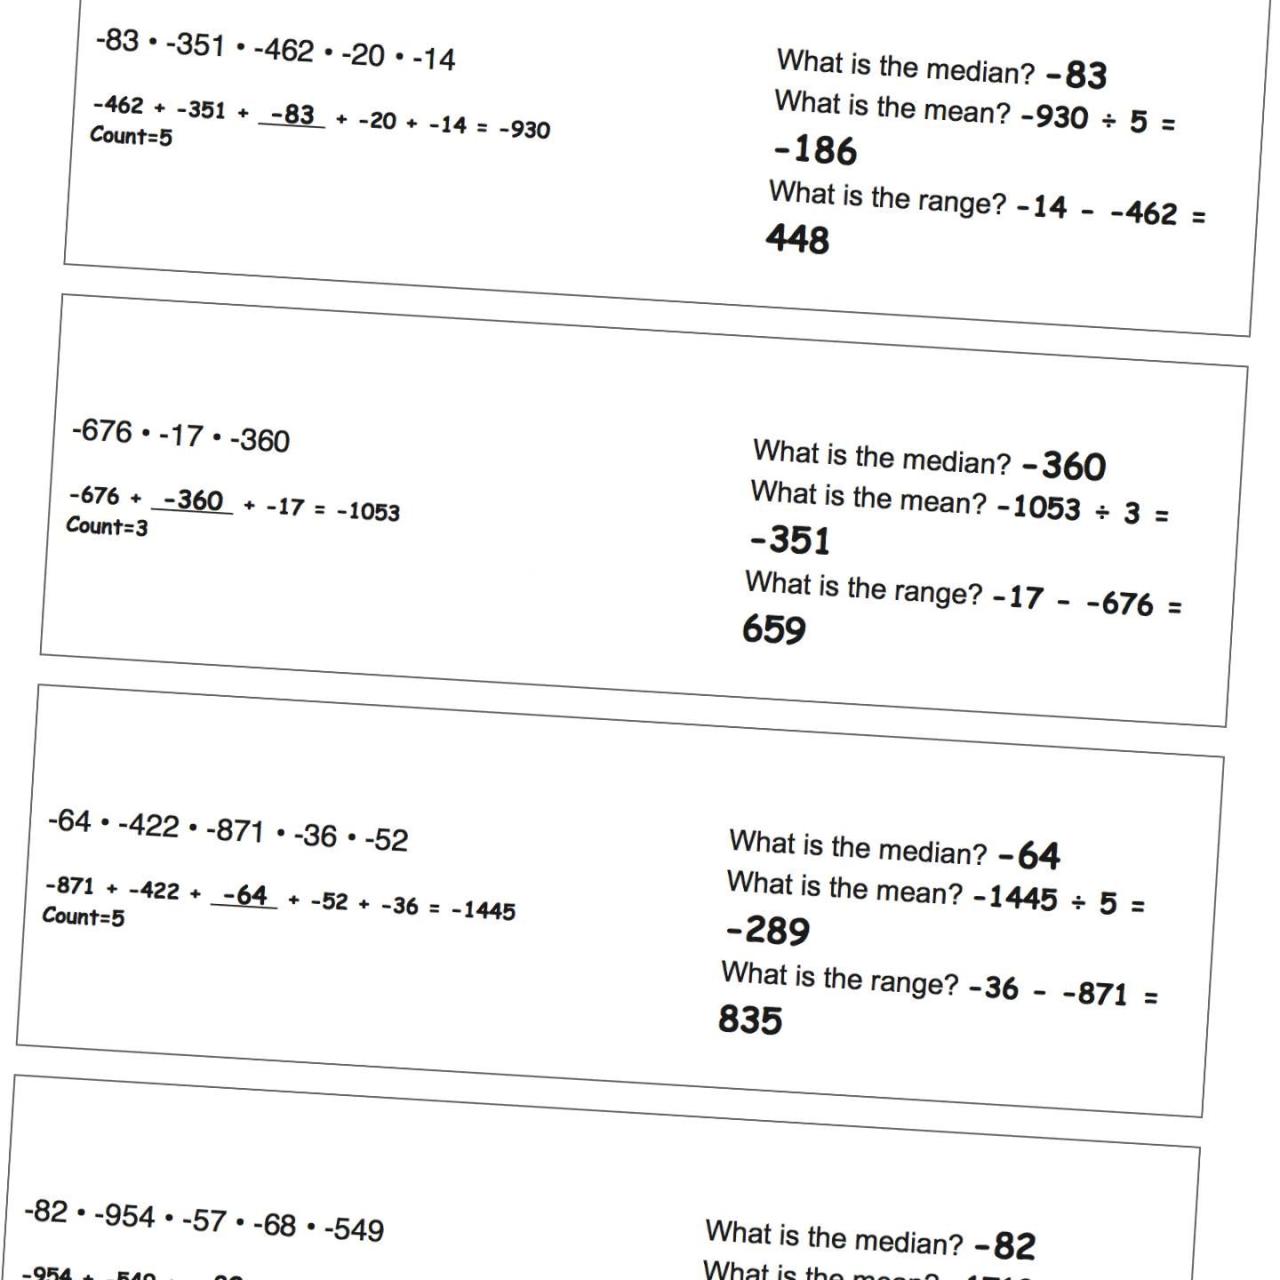 Division Word Problems With Negative Numbers